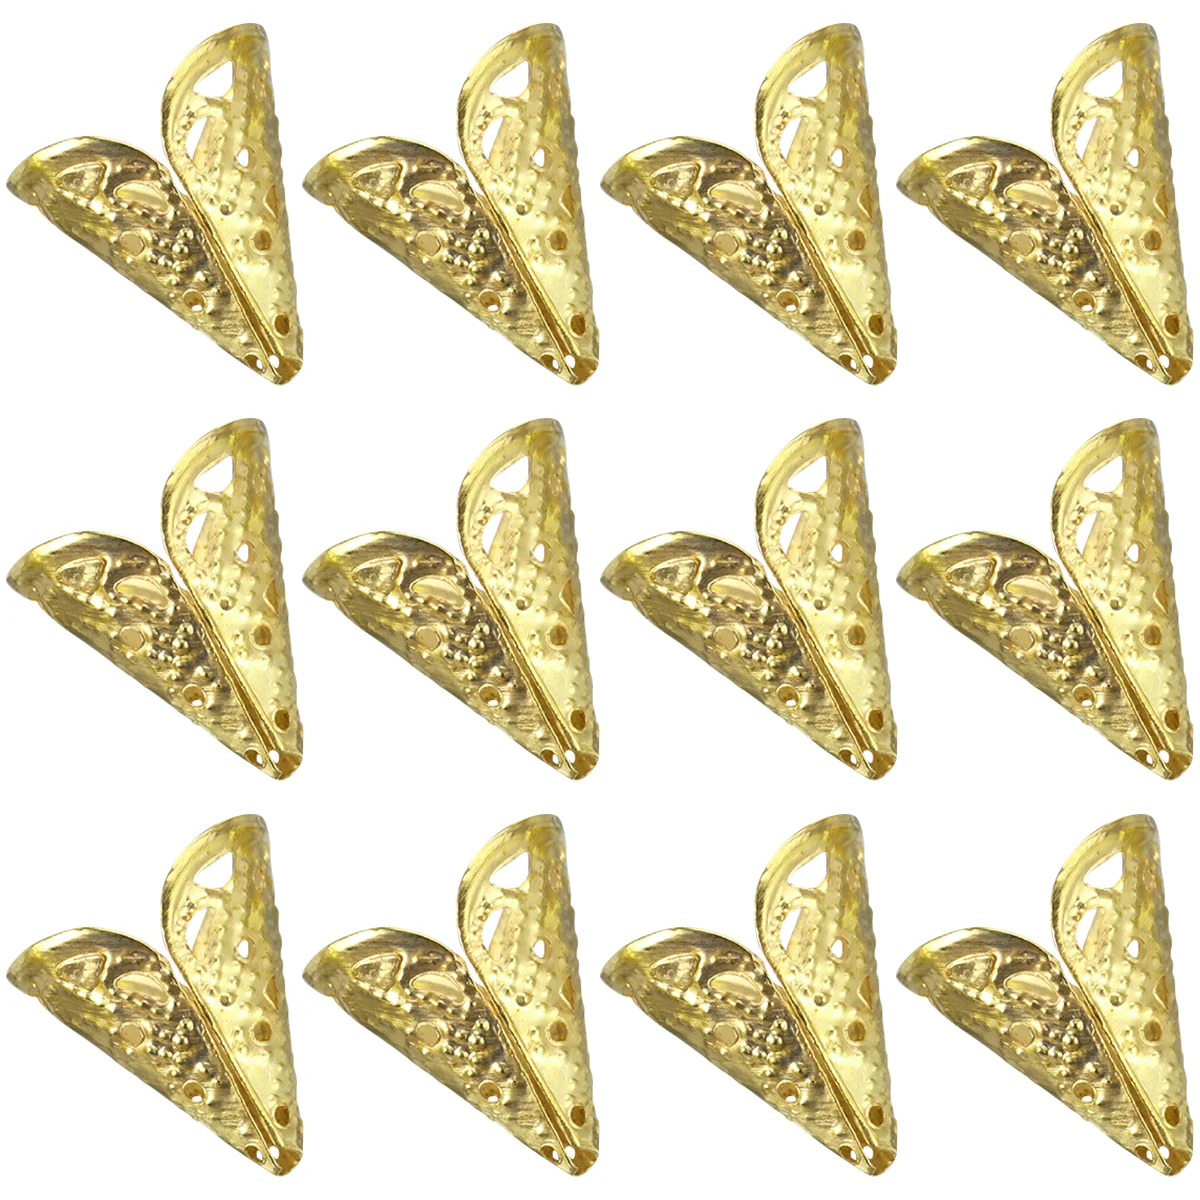 

50pcs Metal Flower Filigree Bead Cones Jewelry End Caps Spacer Beads Jewelry Findings Charms for DIY Craft Bracelet Necklace